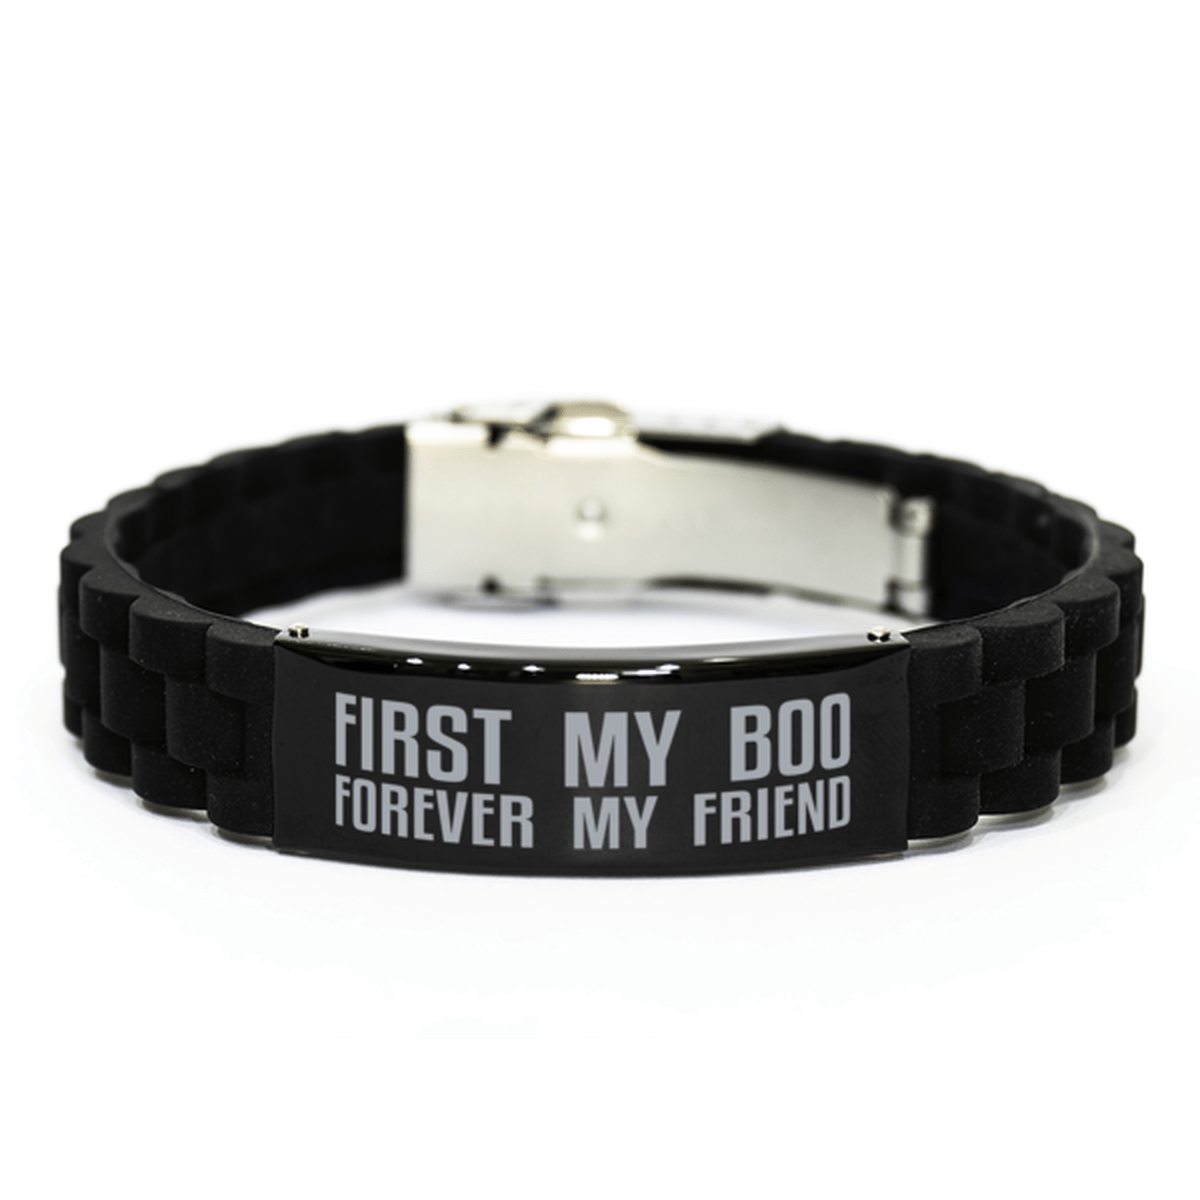 Unique Boo Bracelet, First My Boo Forever My Friend, Best Gift for Boo Anniversary, Birthday, Christmas